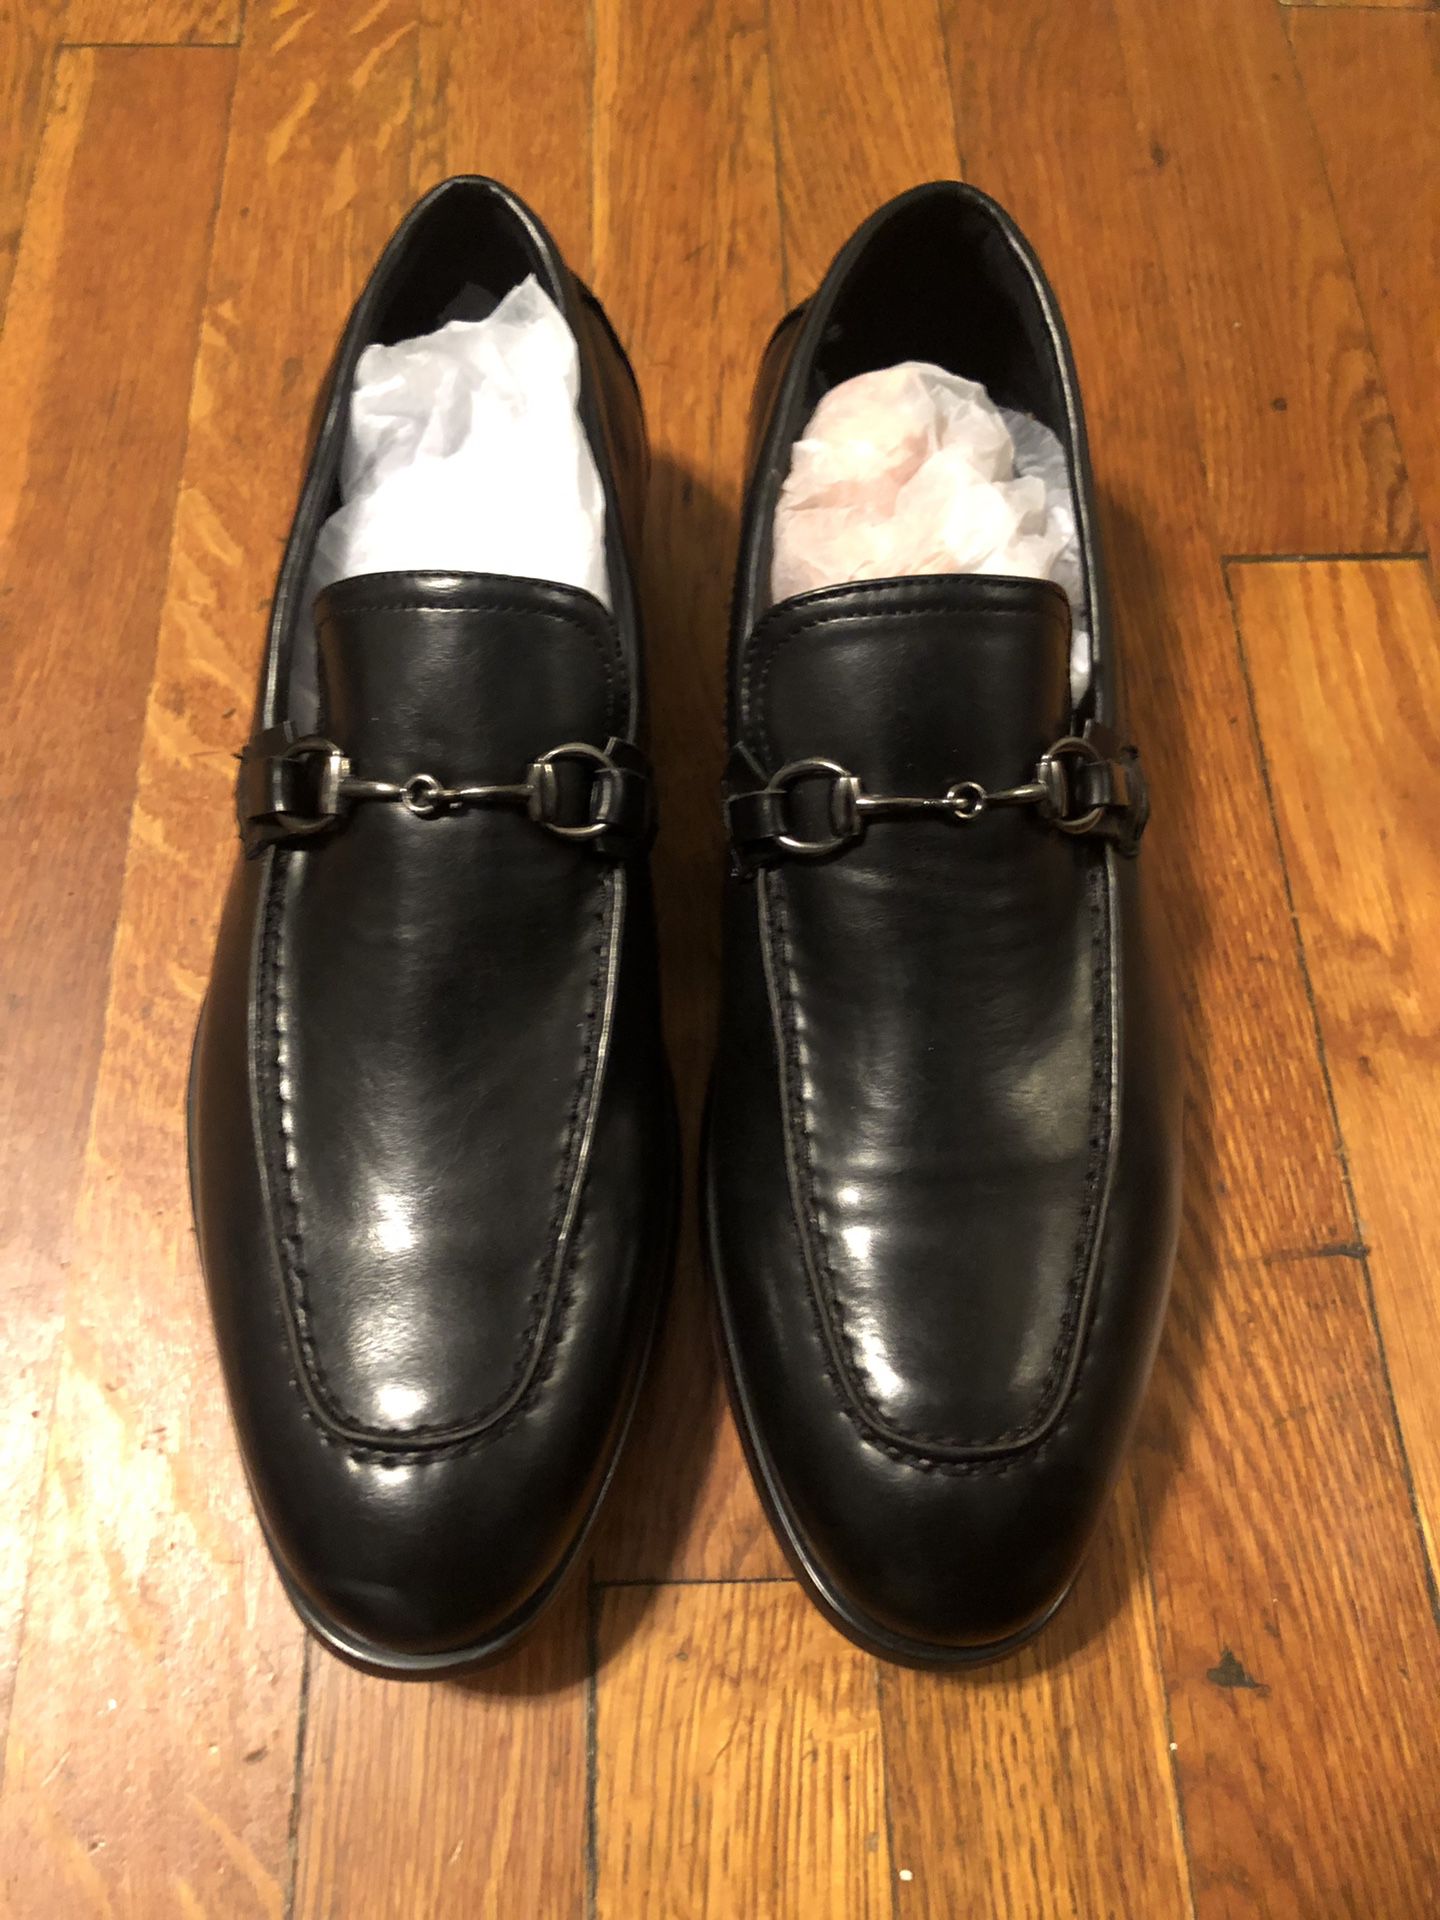 Brand new black dress shoes 12! Never worn in excellent condition